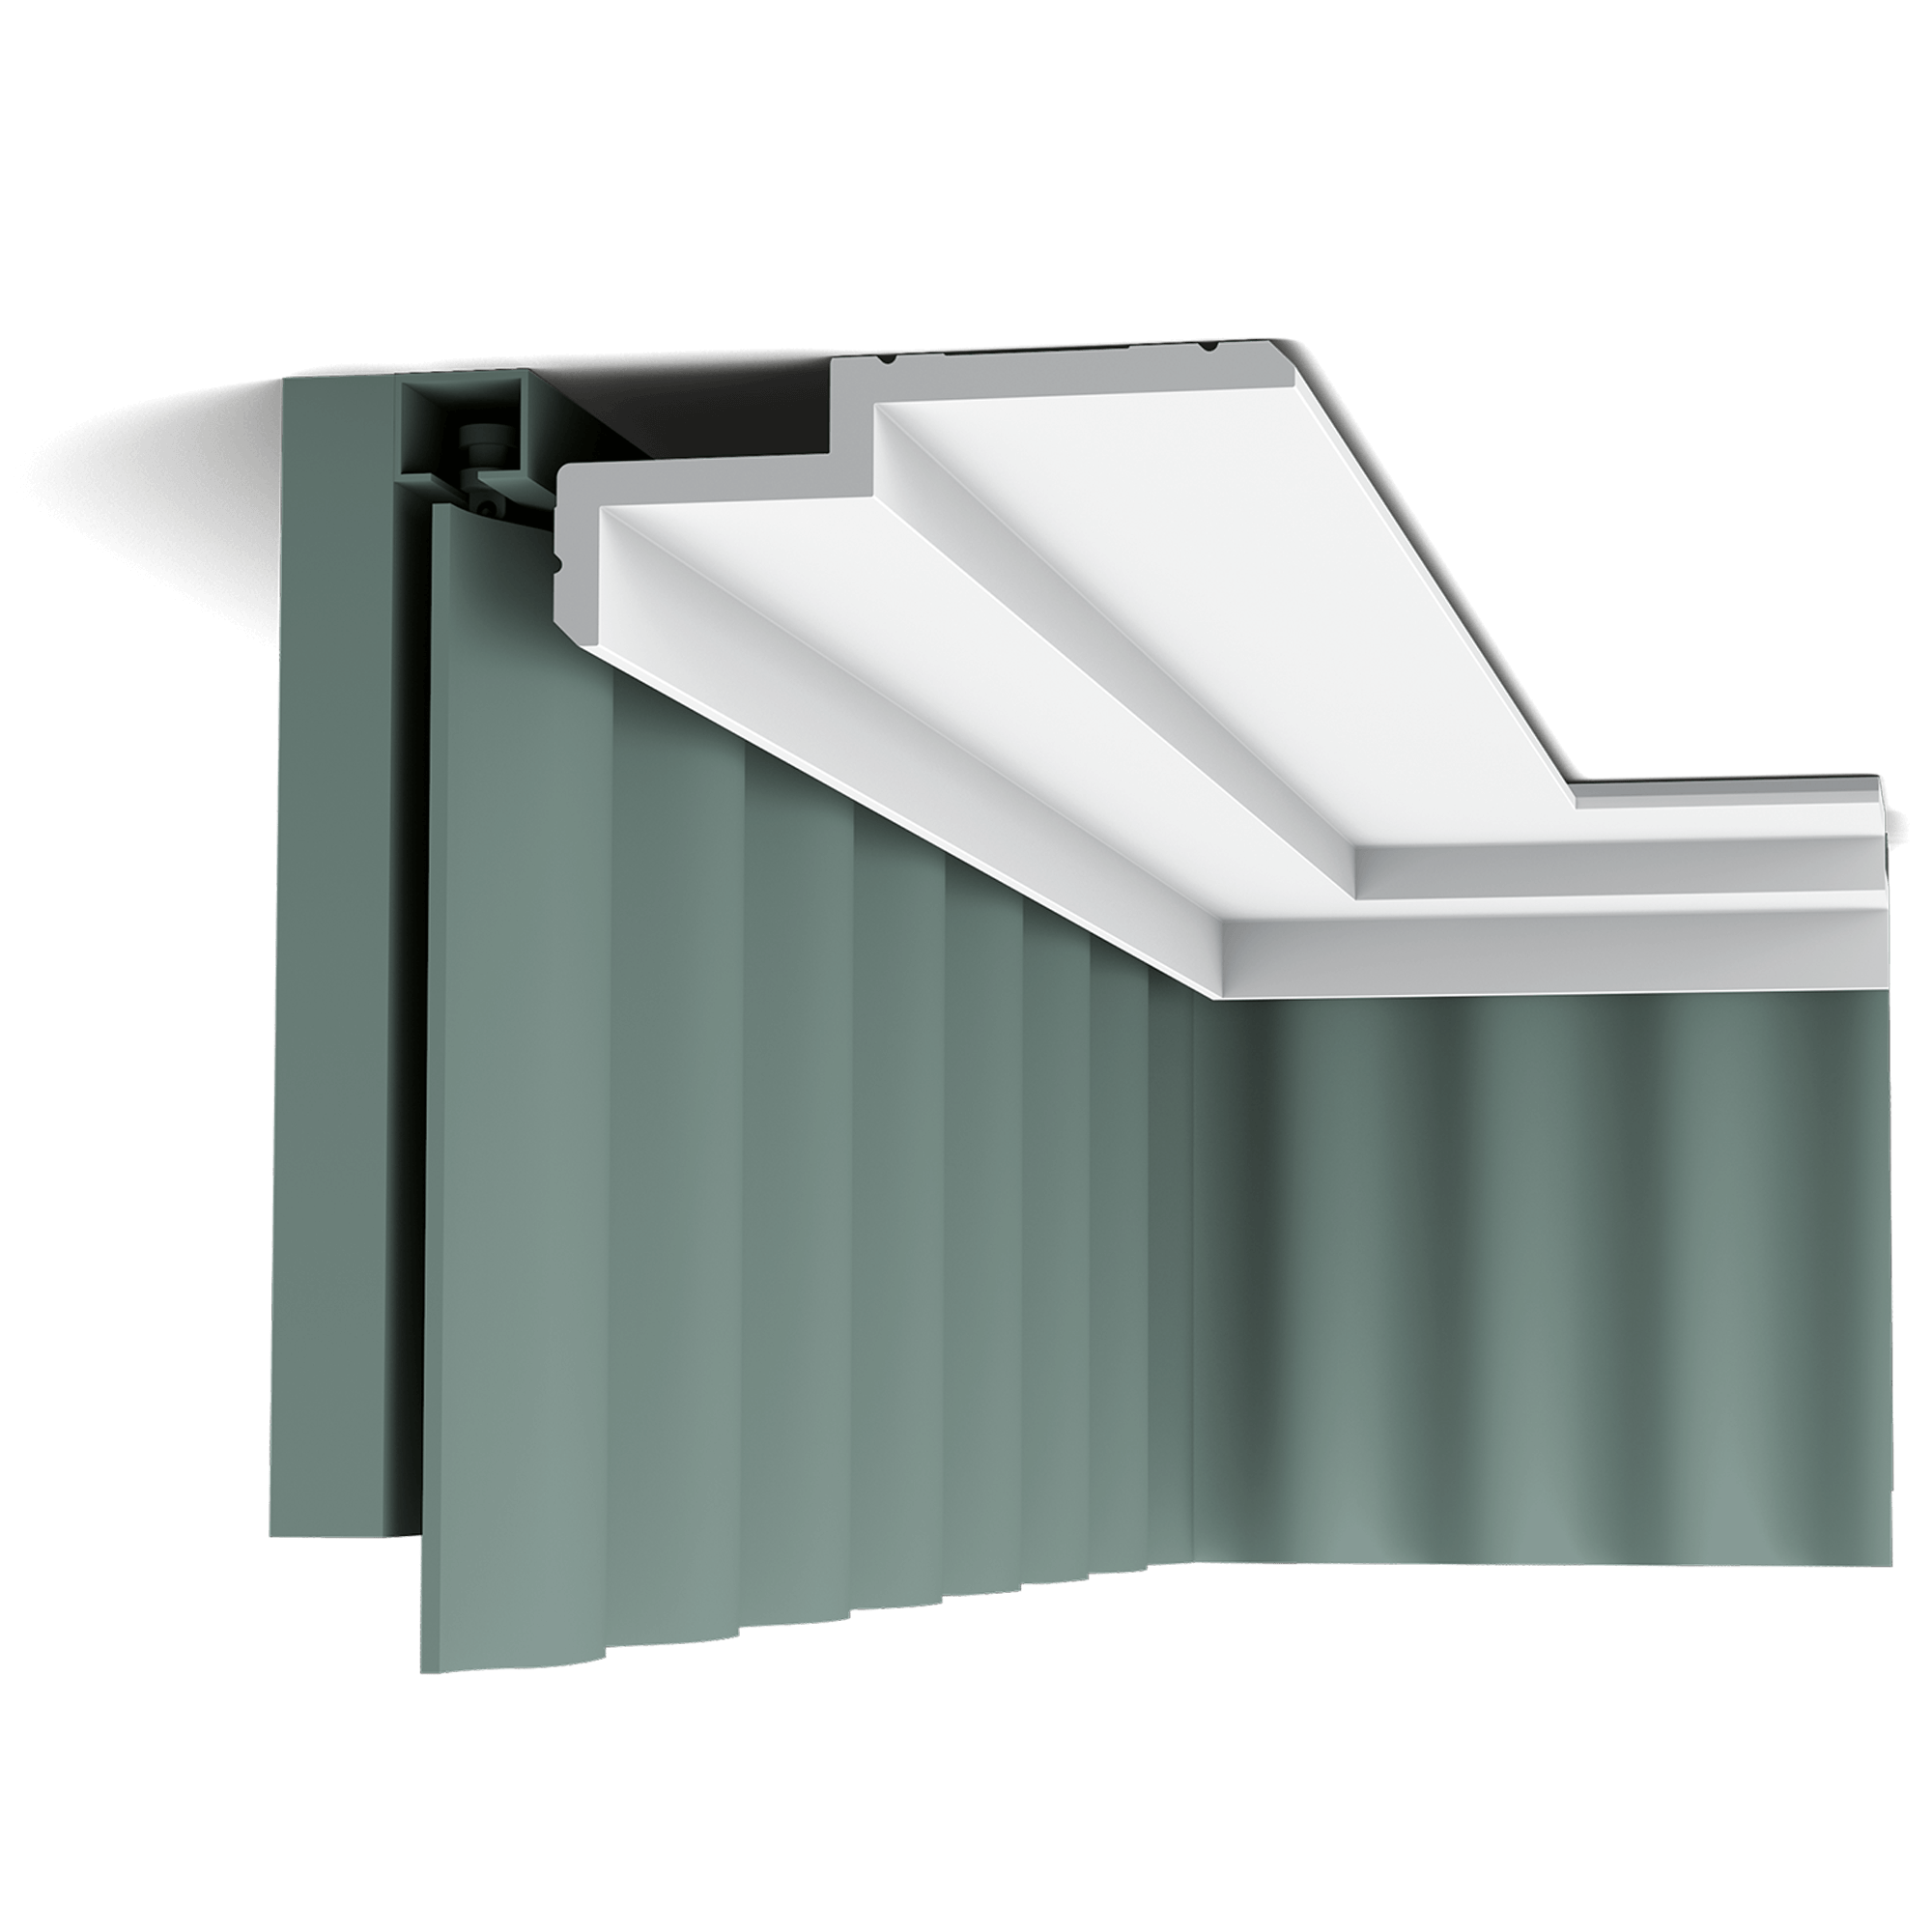 c391 curtain profile 2f23 This clean, modern profile from the Steps range is also suitable as a curtain pelmet. This nicely conceals the curtain fixtures for a neat finish. Designed by Orio Tonini.